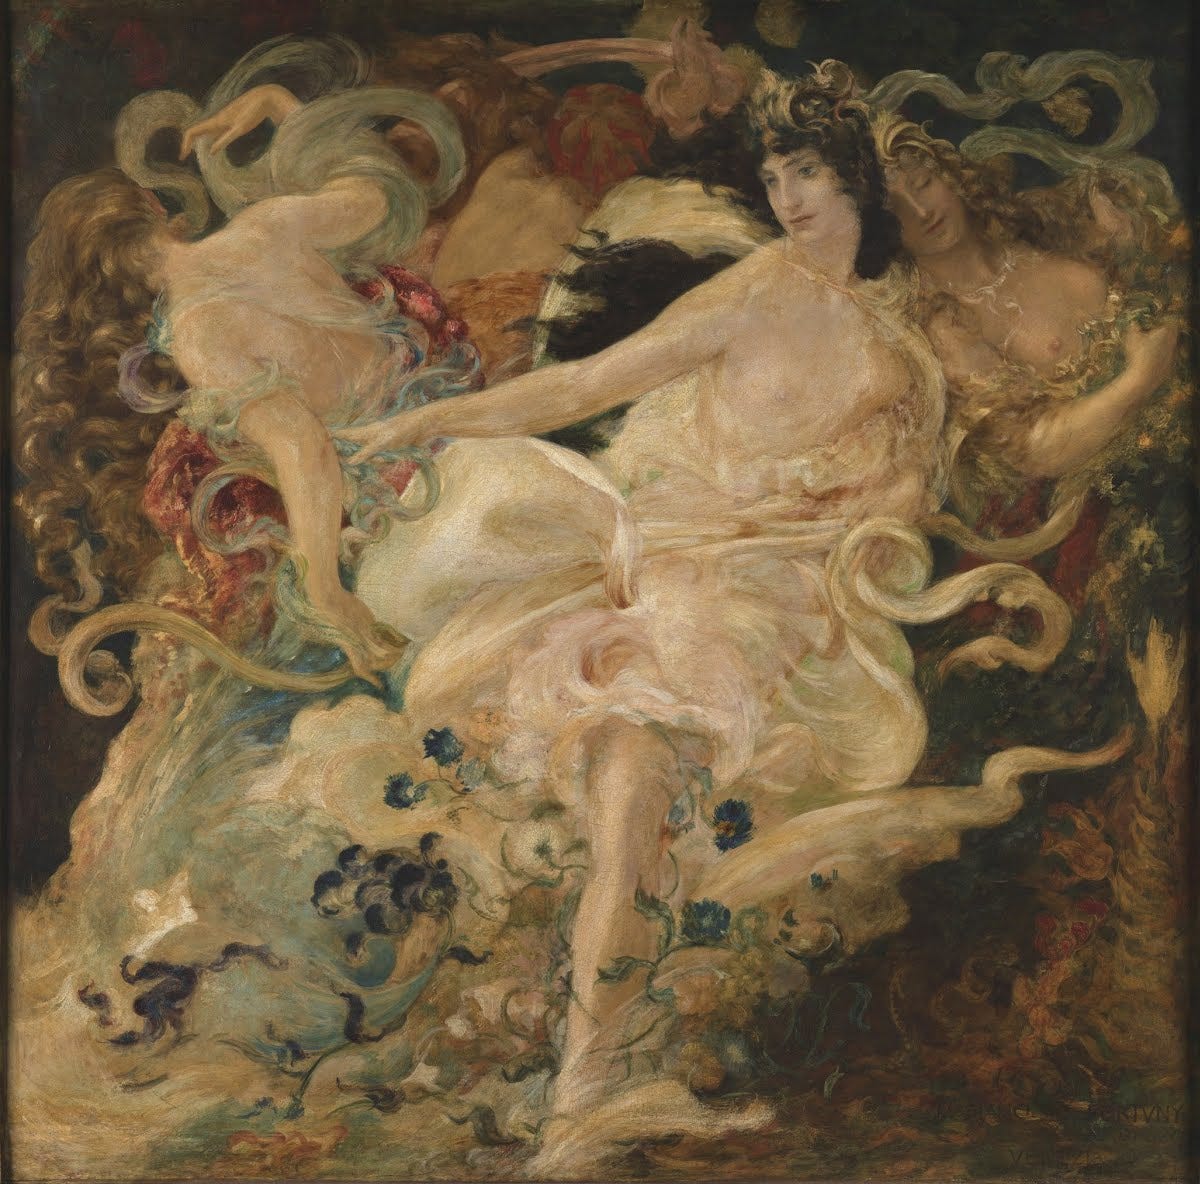 Wagnerian Cycle. Parsifal. The Flower-Maidens - Mariano Fortuny y Madrazo —  Google Arts & Culture